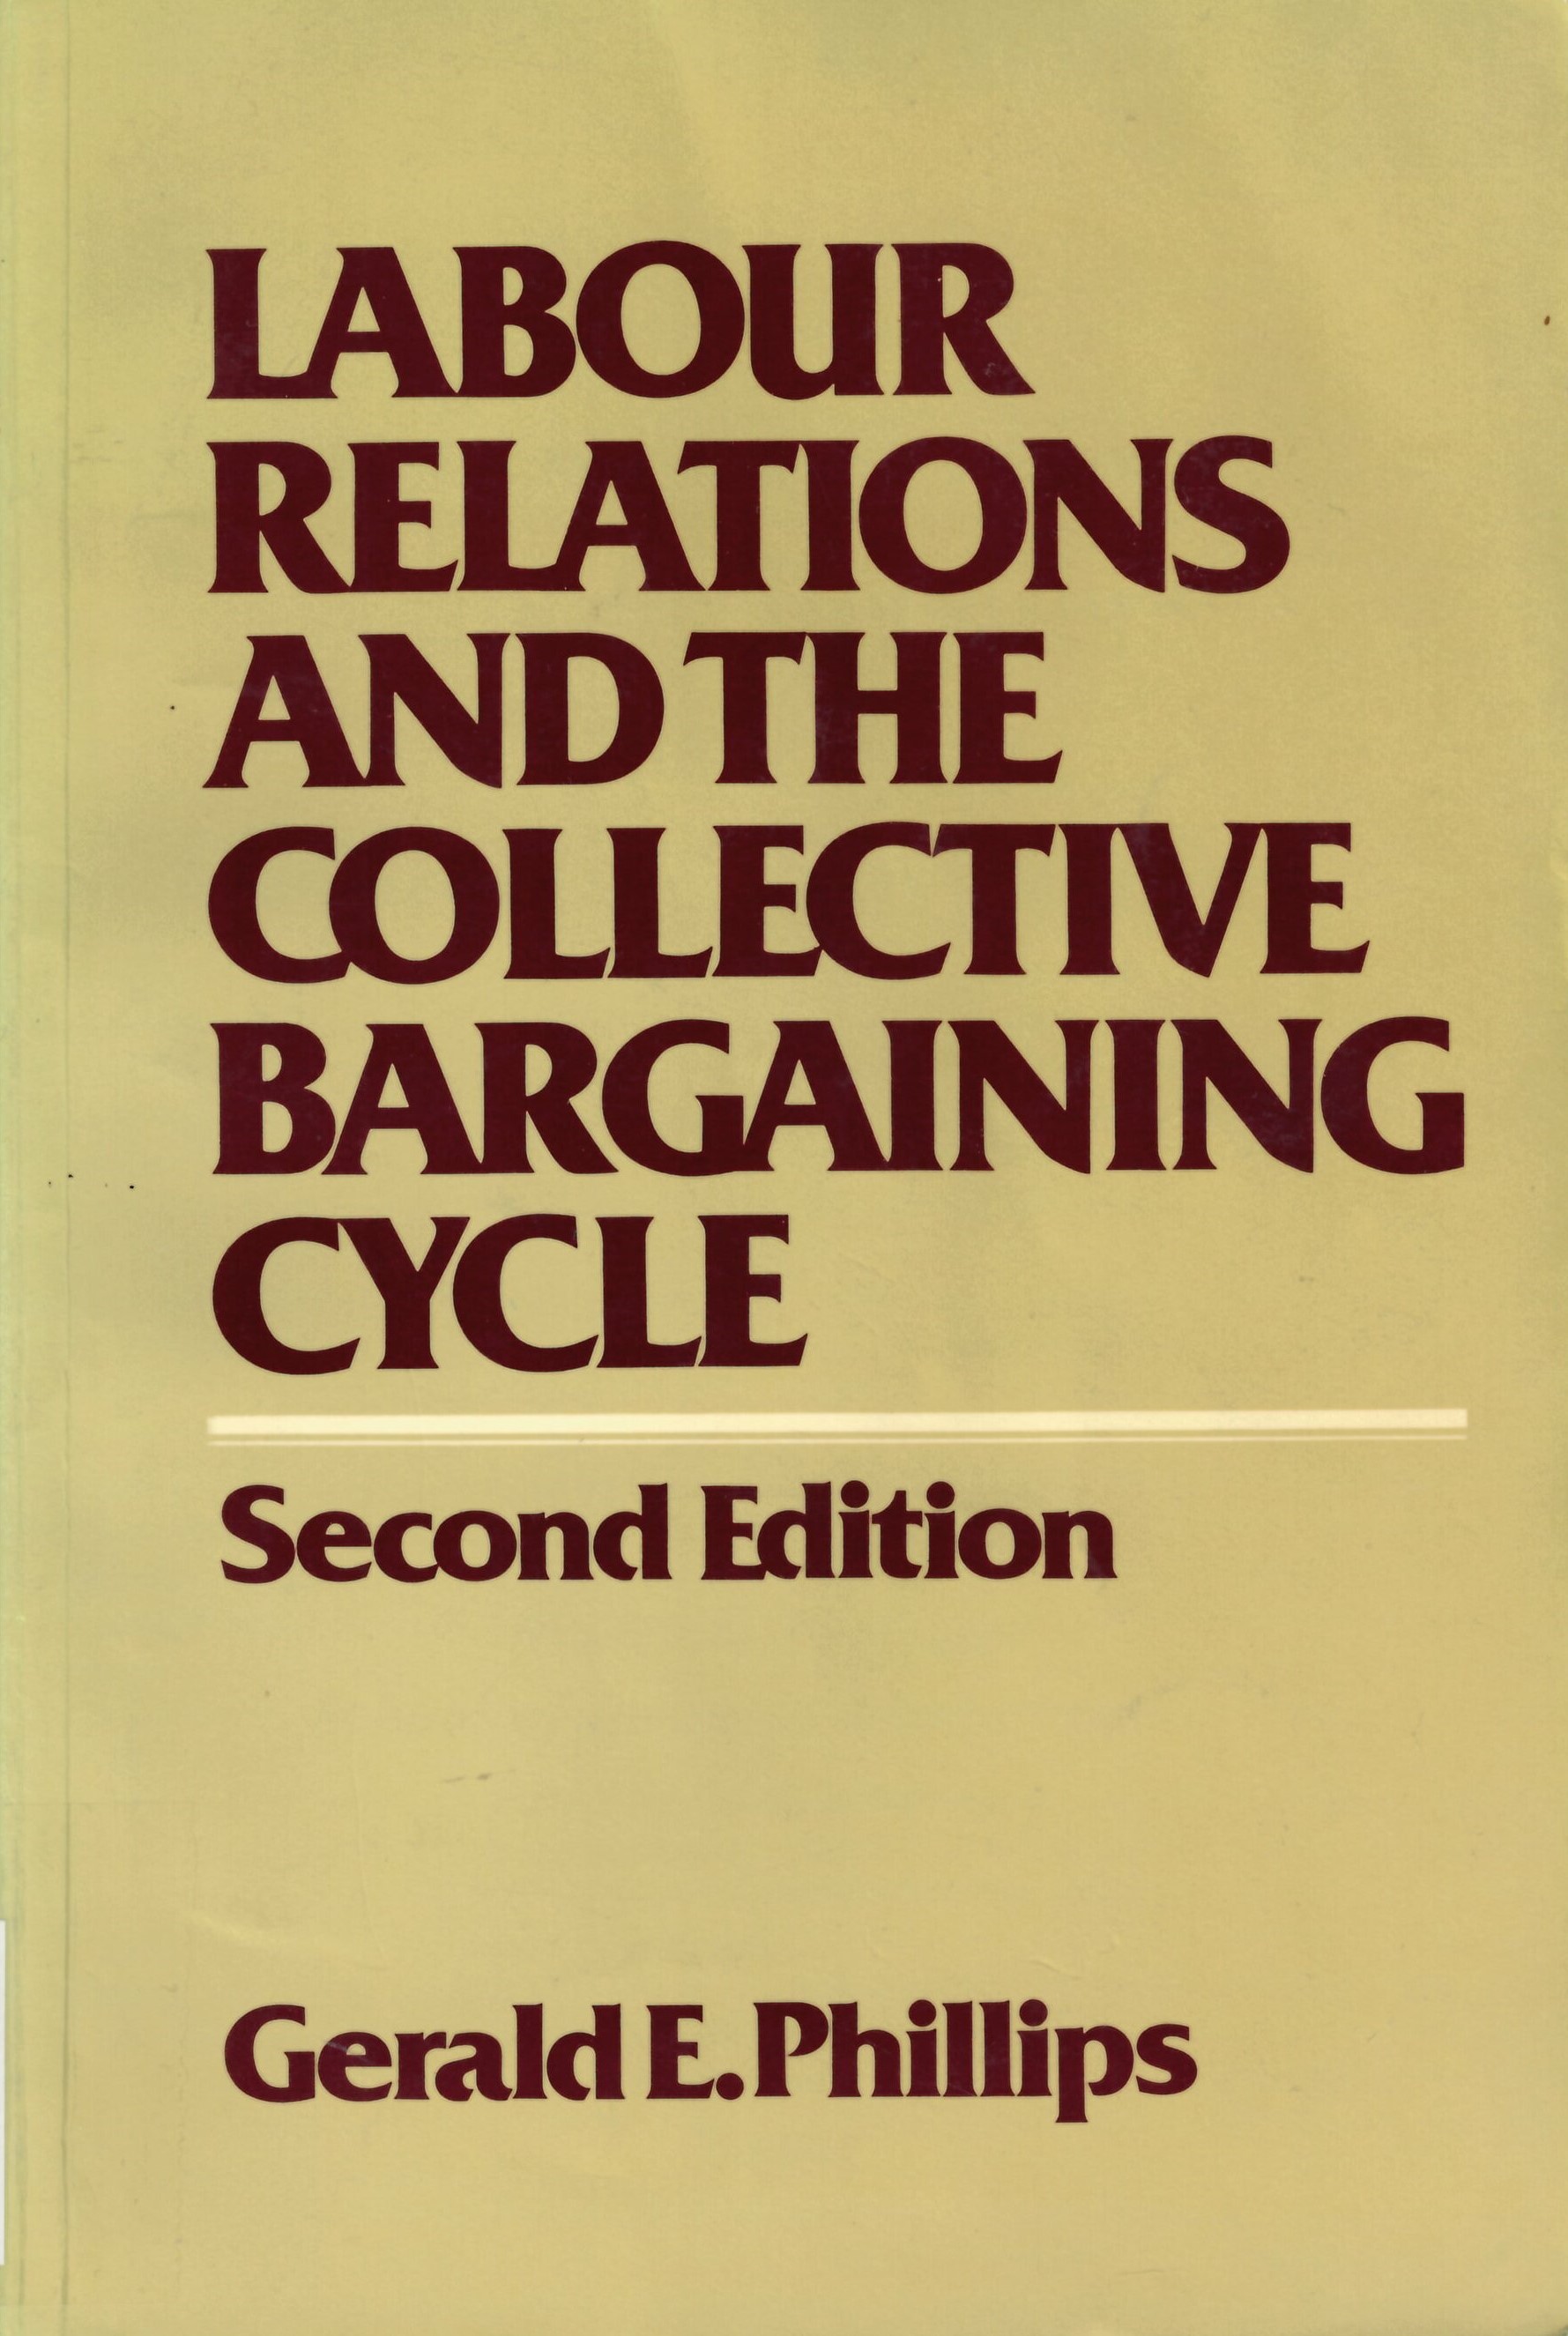 Labour relations and the collective bargaining cycle